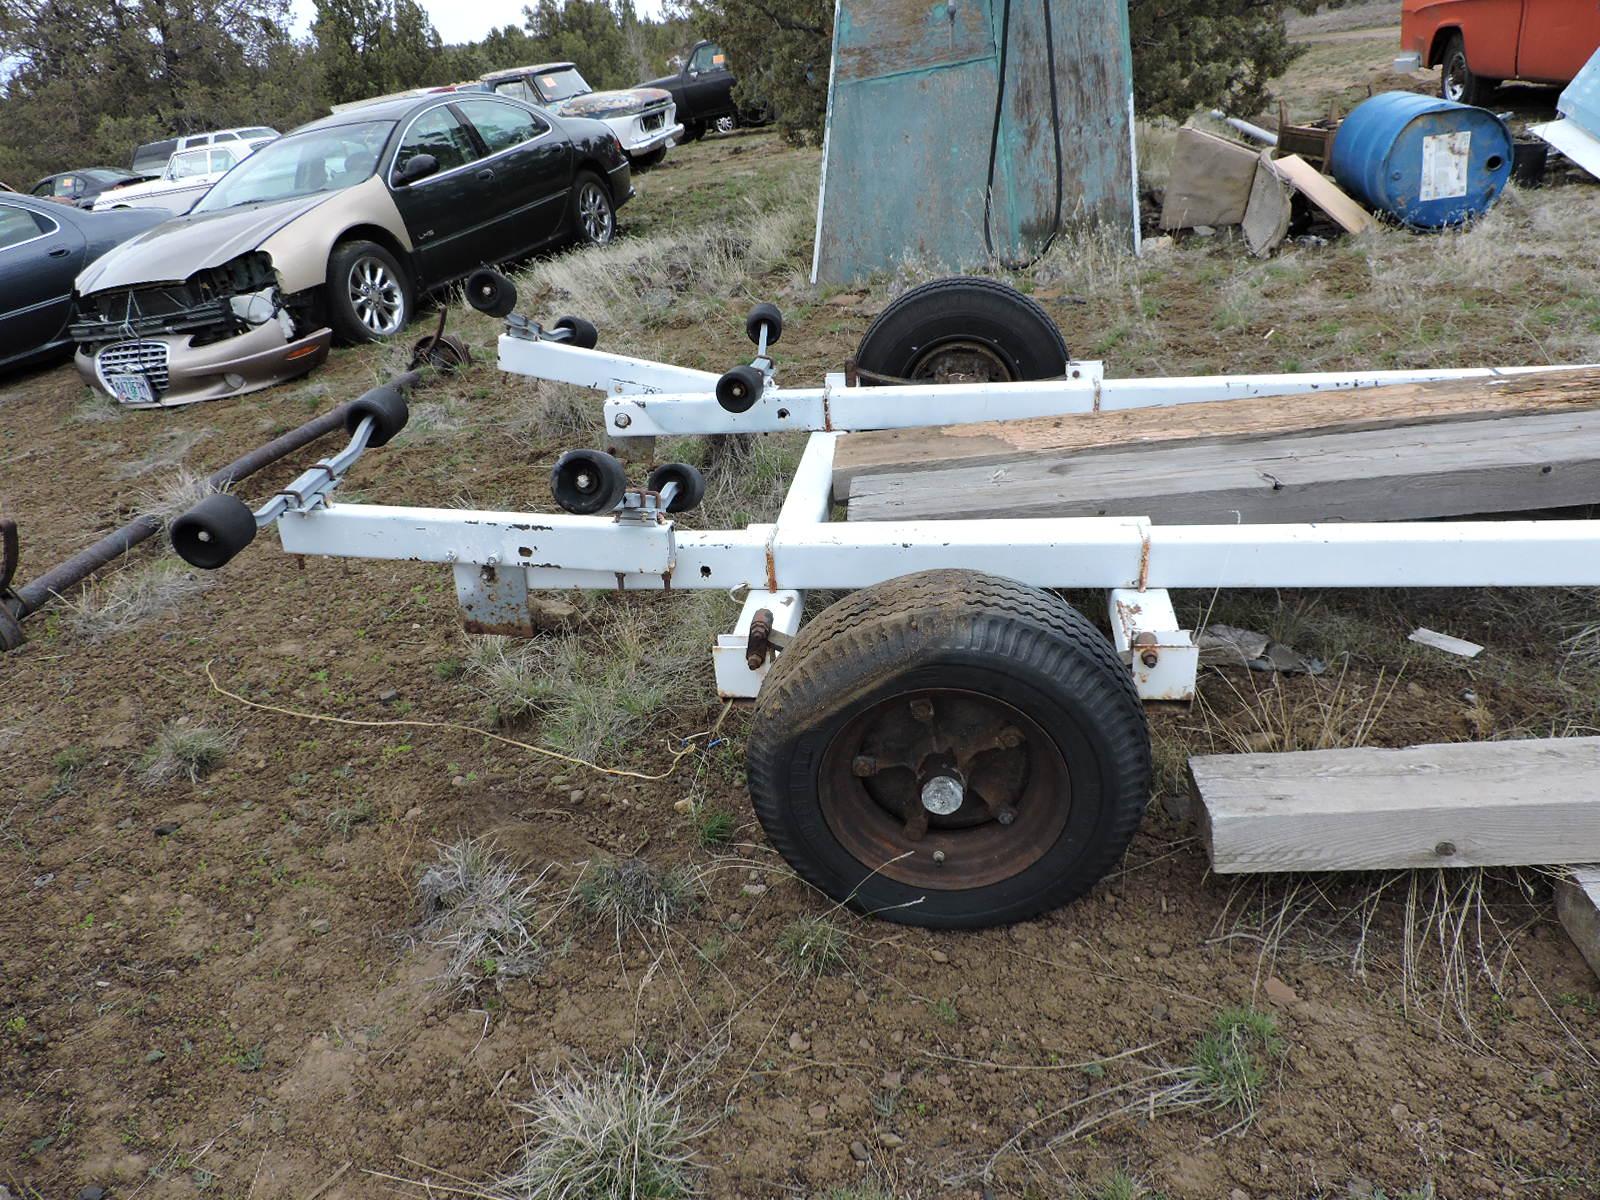 Single-Axle Boat Trailer / Brand Unknown / Some Parts Missing